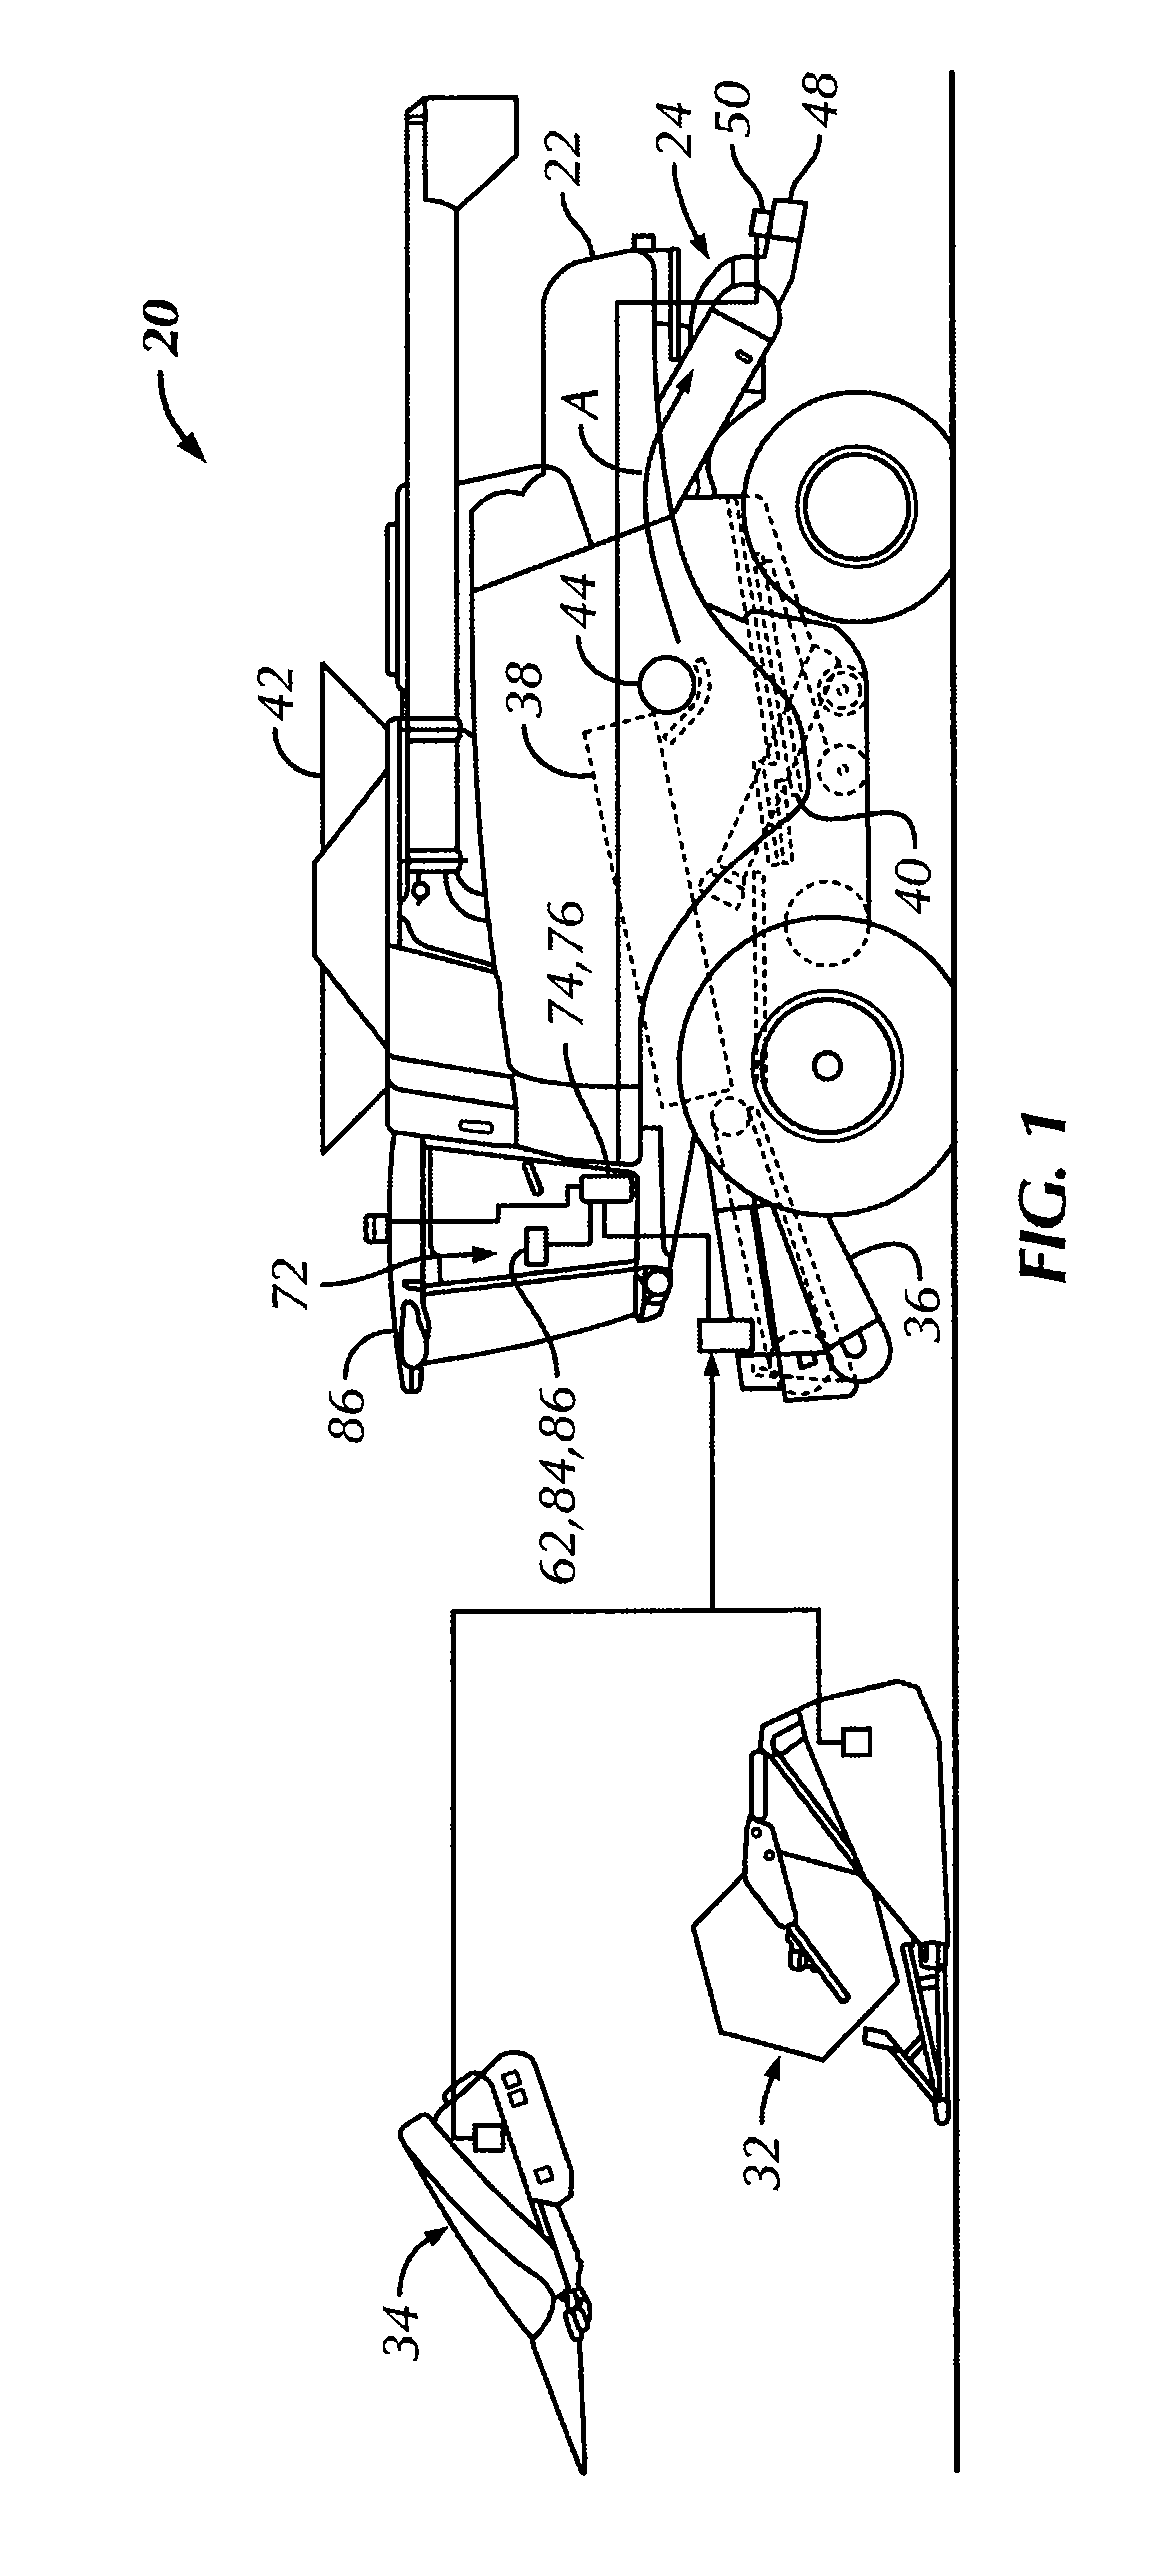 Apparatus and method for automatically controlling the settings of an adjustable crop residue spreader of an agricultural combine